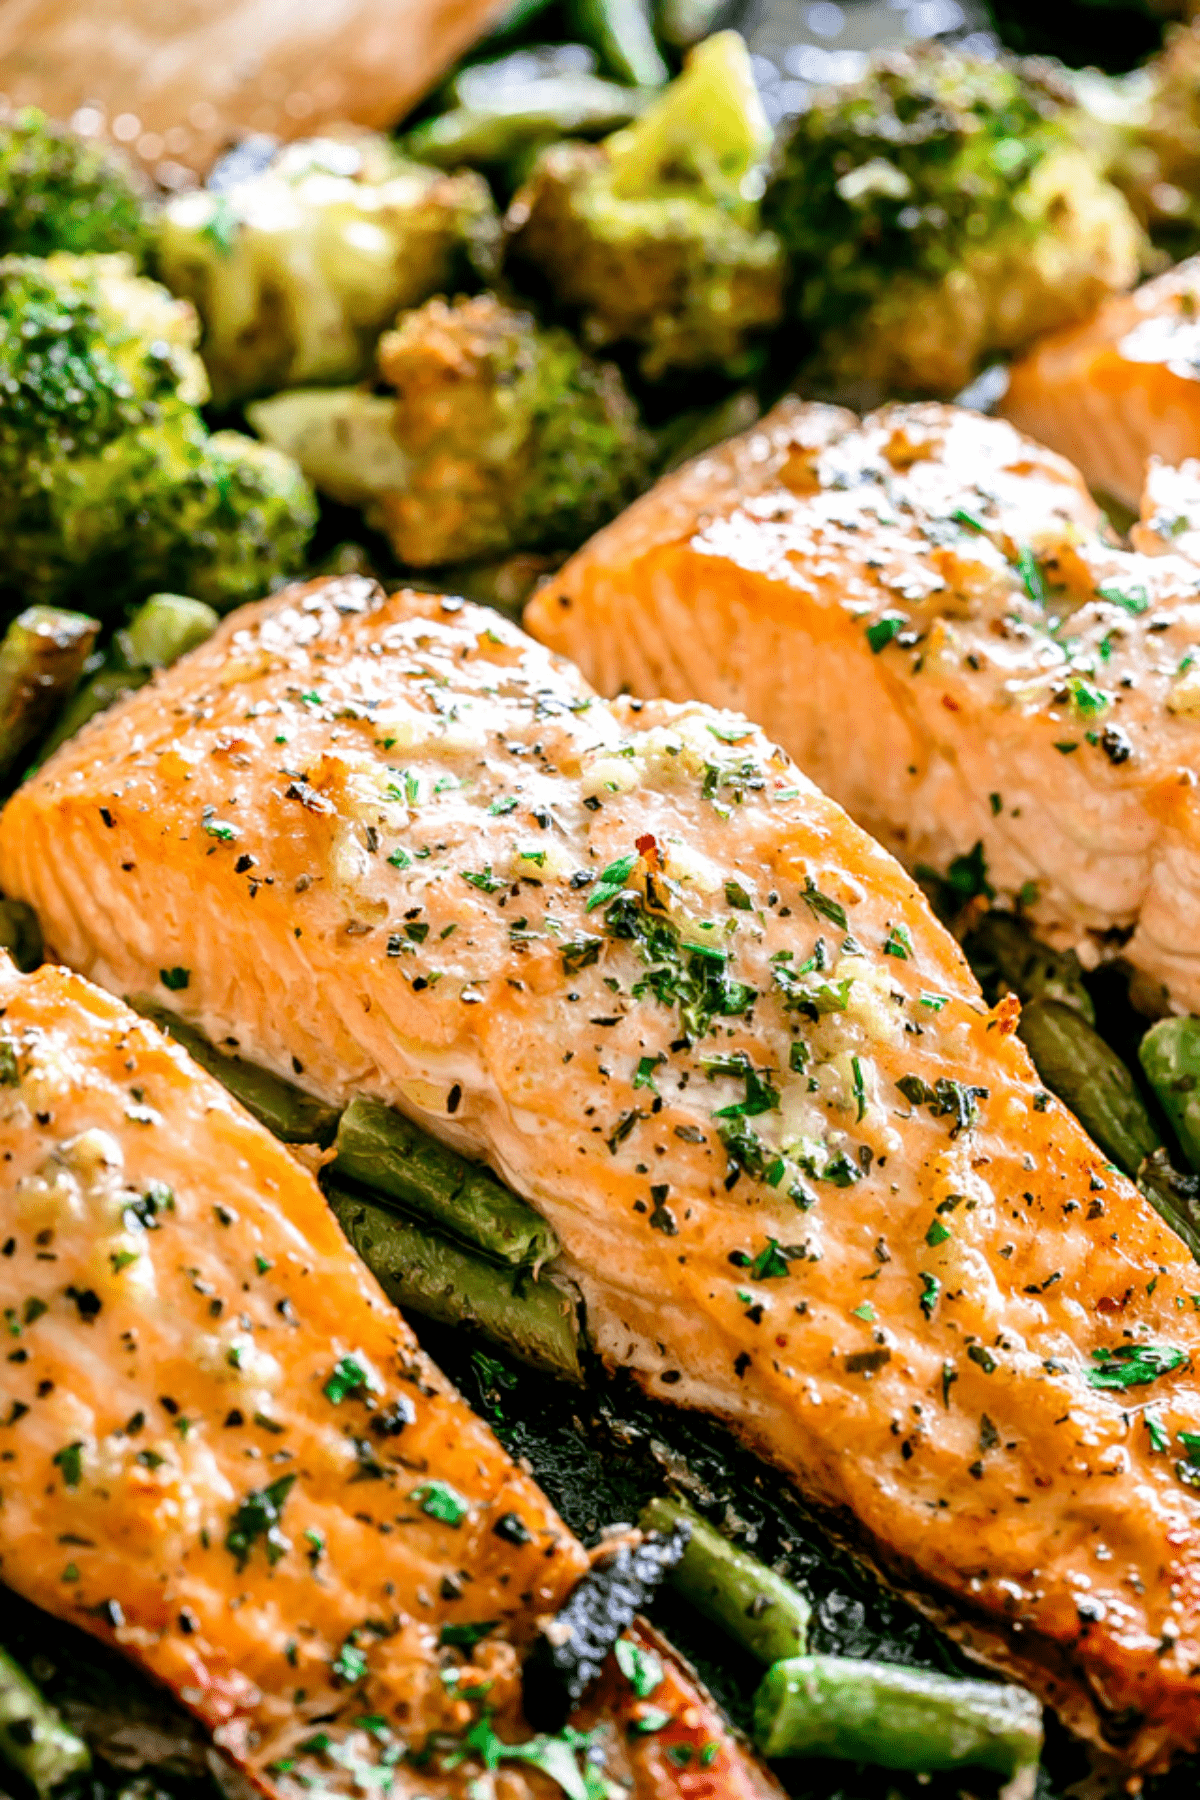 Seasoned salmon fillets baked on a tray on a bed of green vegetables.